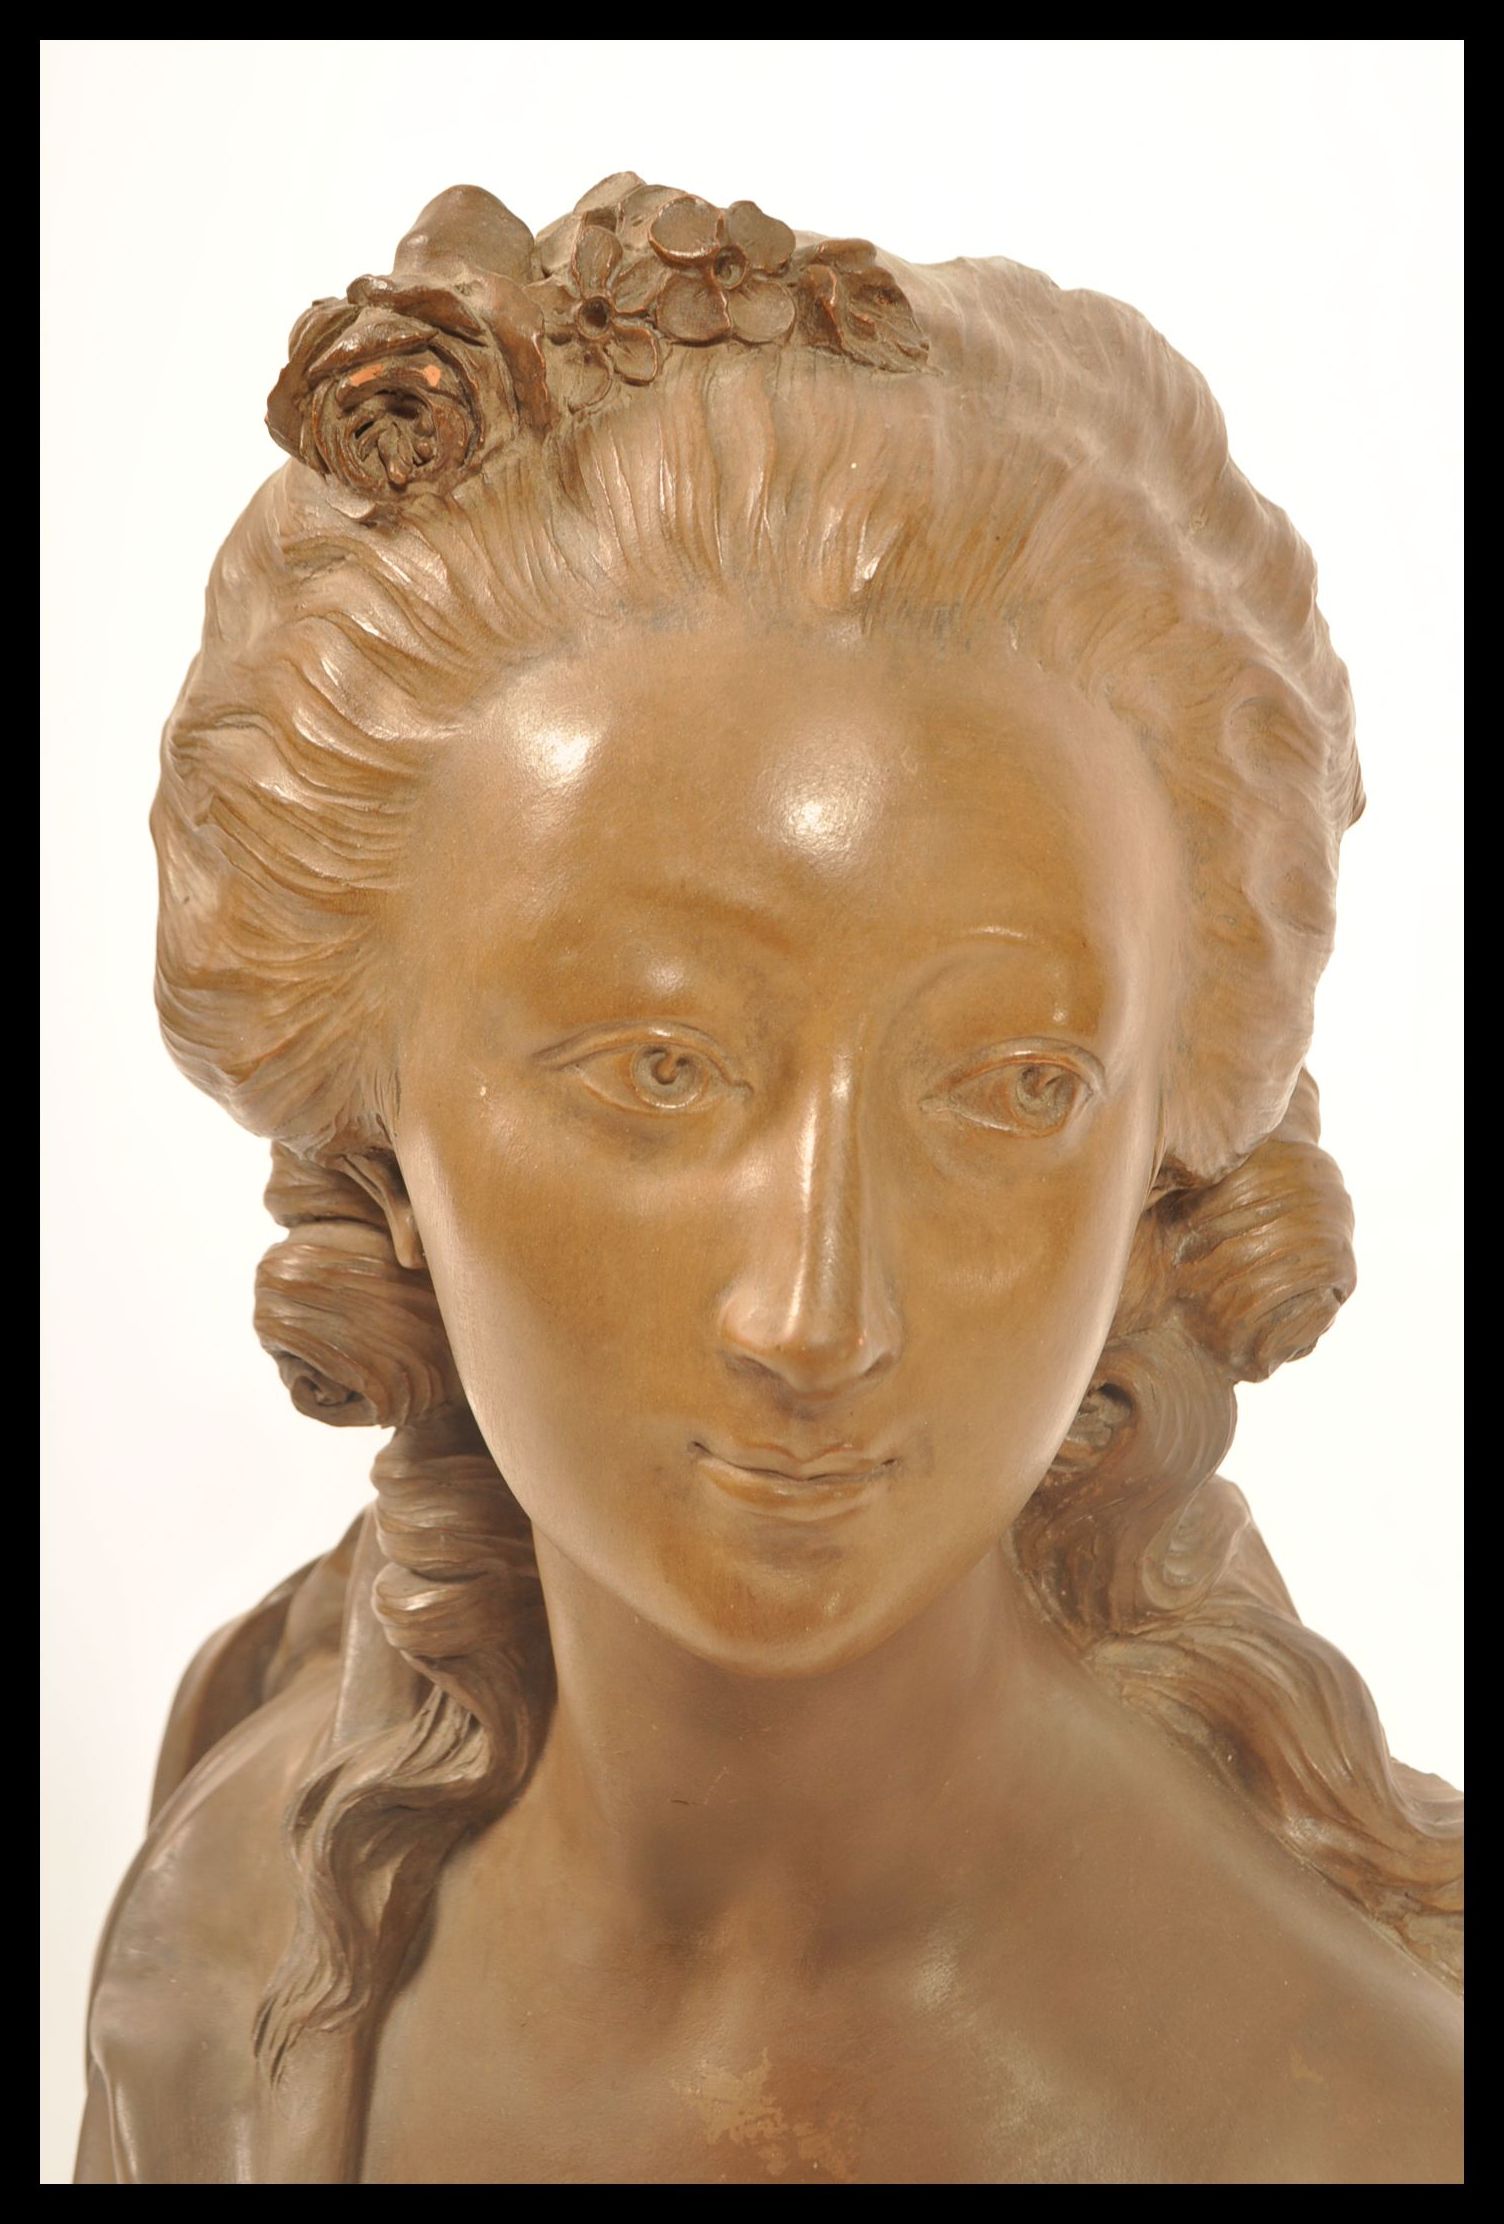 19TH CENTURY LARGE TERRACOTTA BUST AFTER AUGUSTIN PAJOU - Image 4 of 8